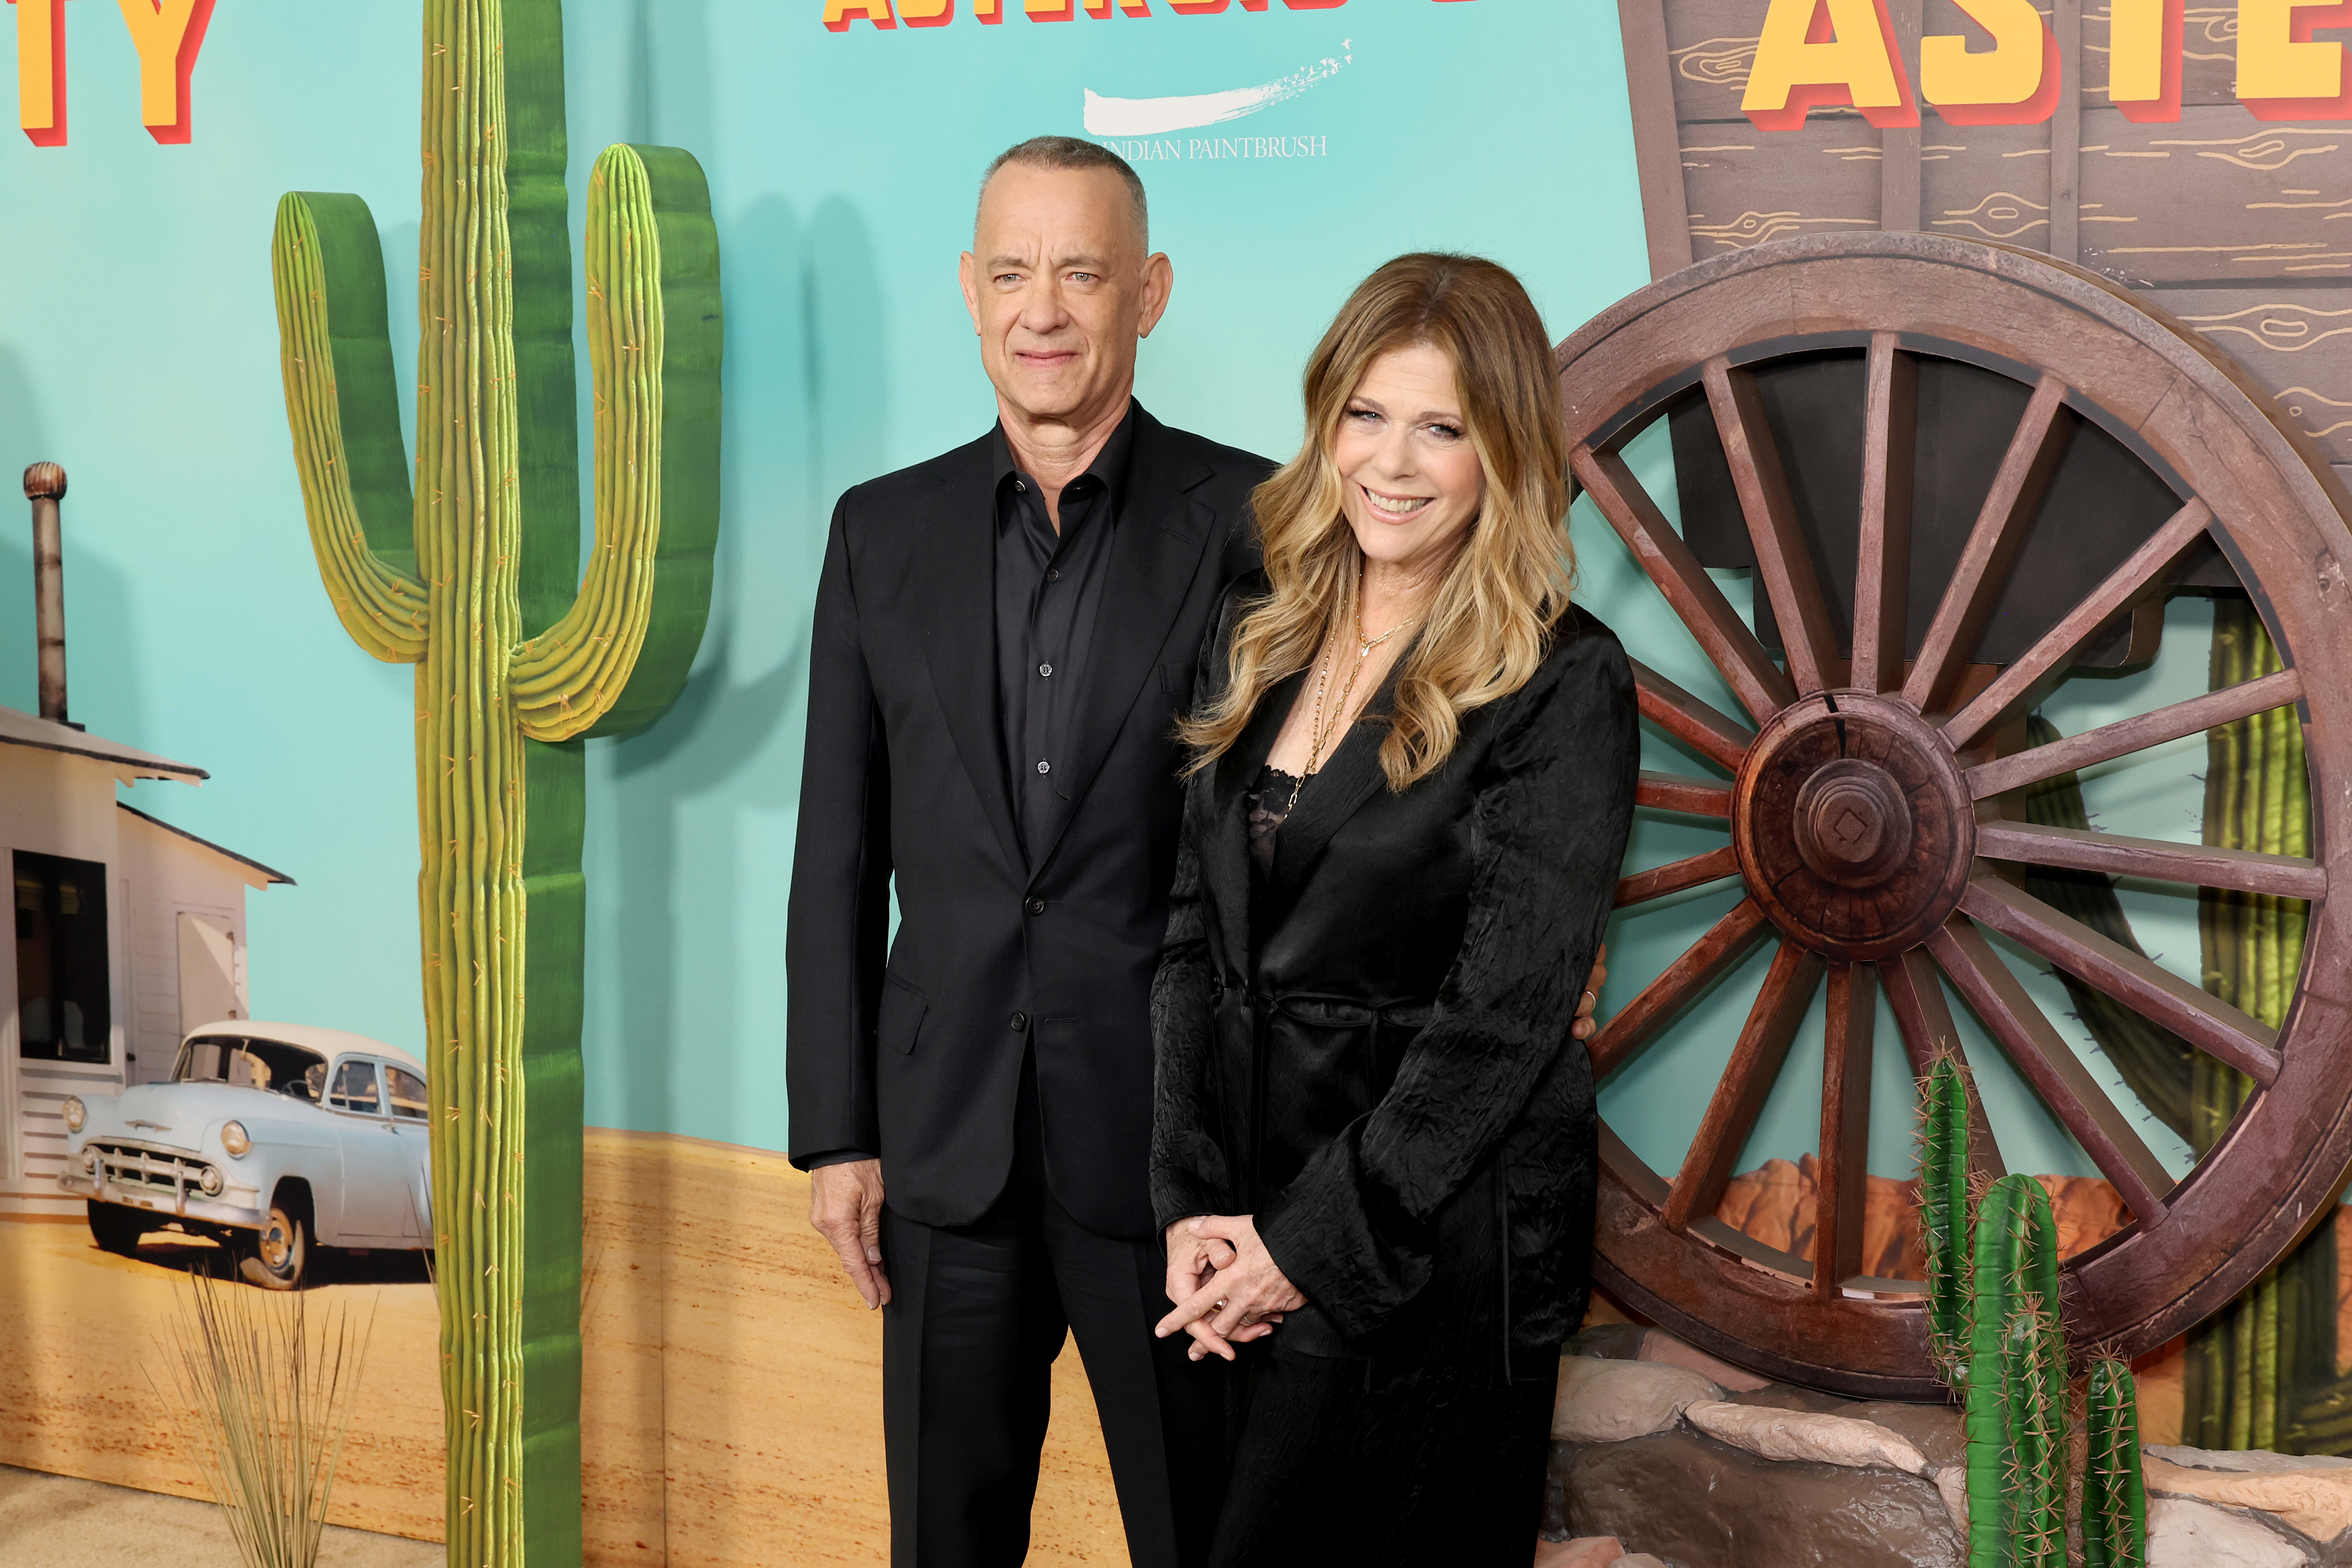 Tom Hanks and Rita Wilson attend the "Asteroid City" New York Premiere at Alice Tully Hall, on June 13, 2023, in New York City. | Source: Getty Images